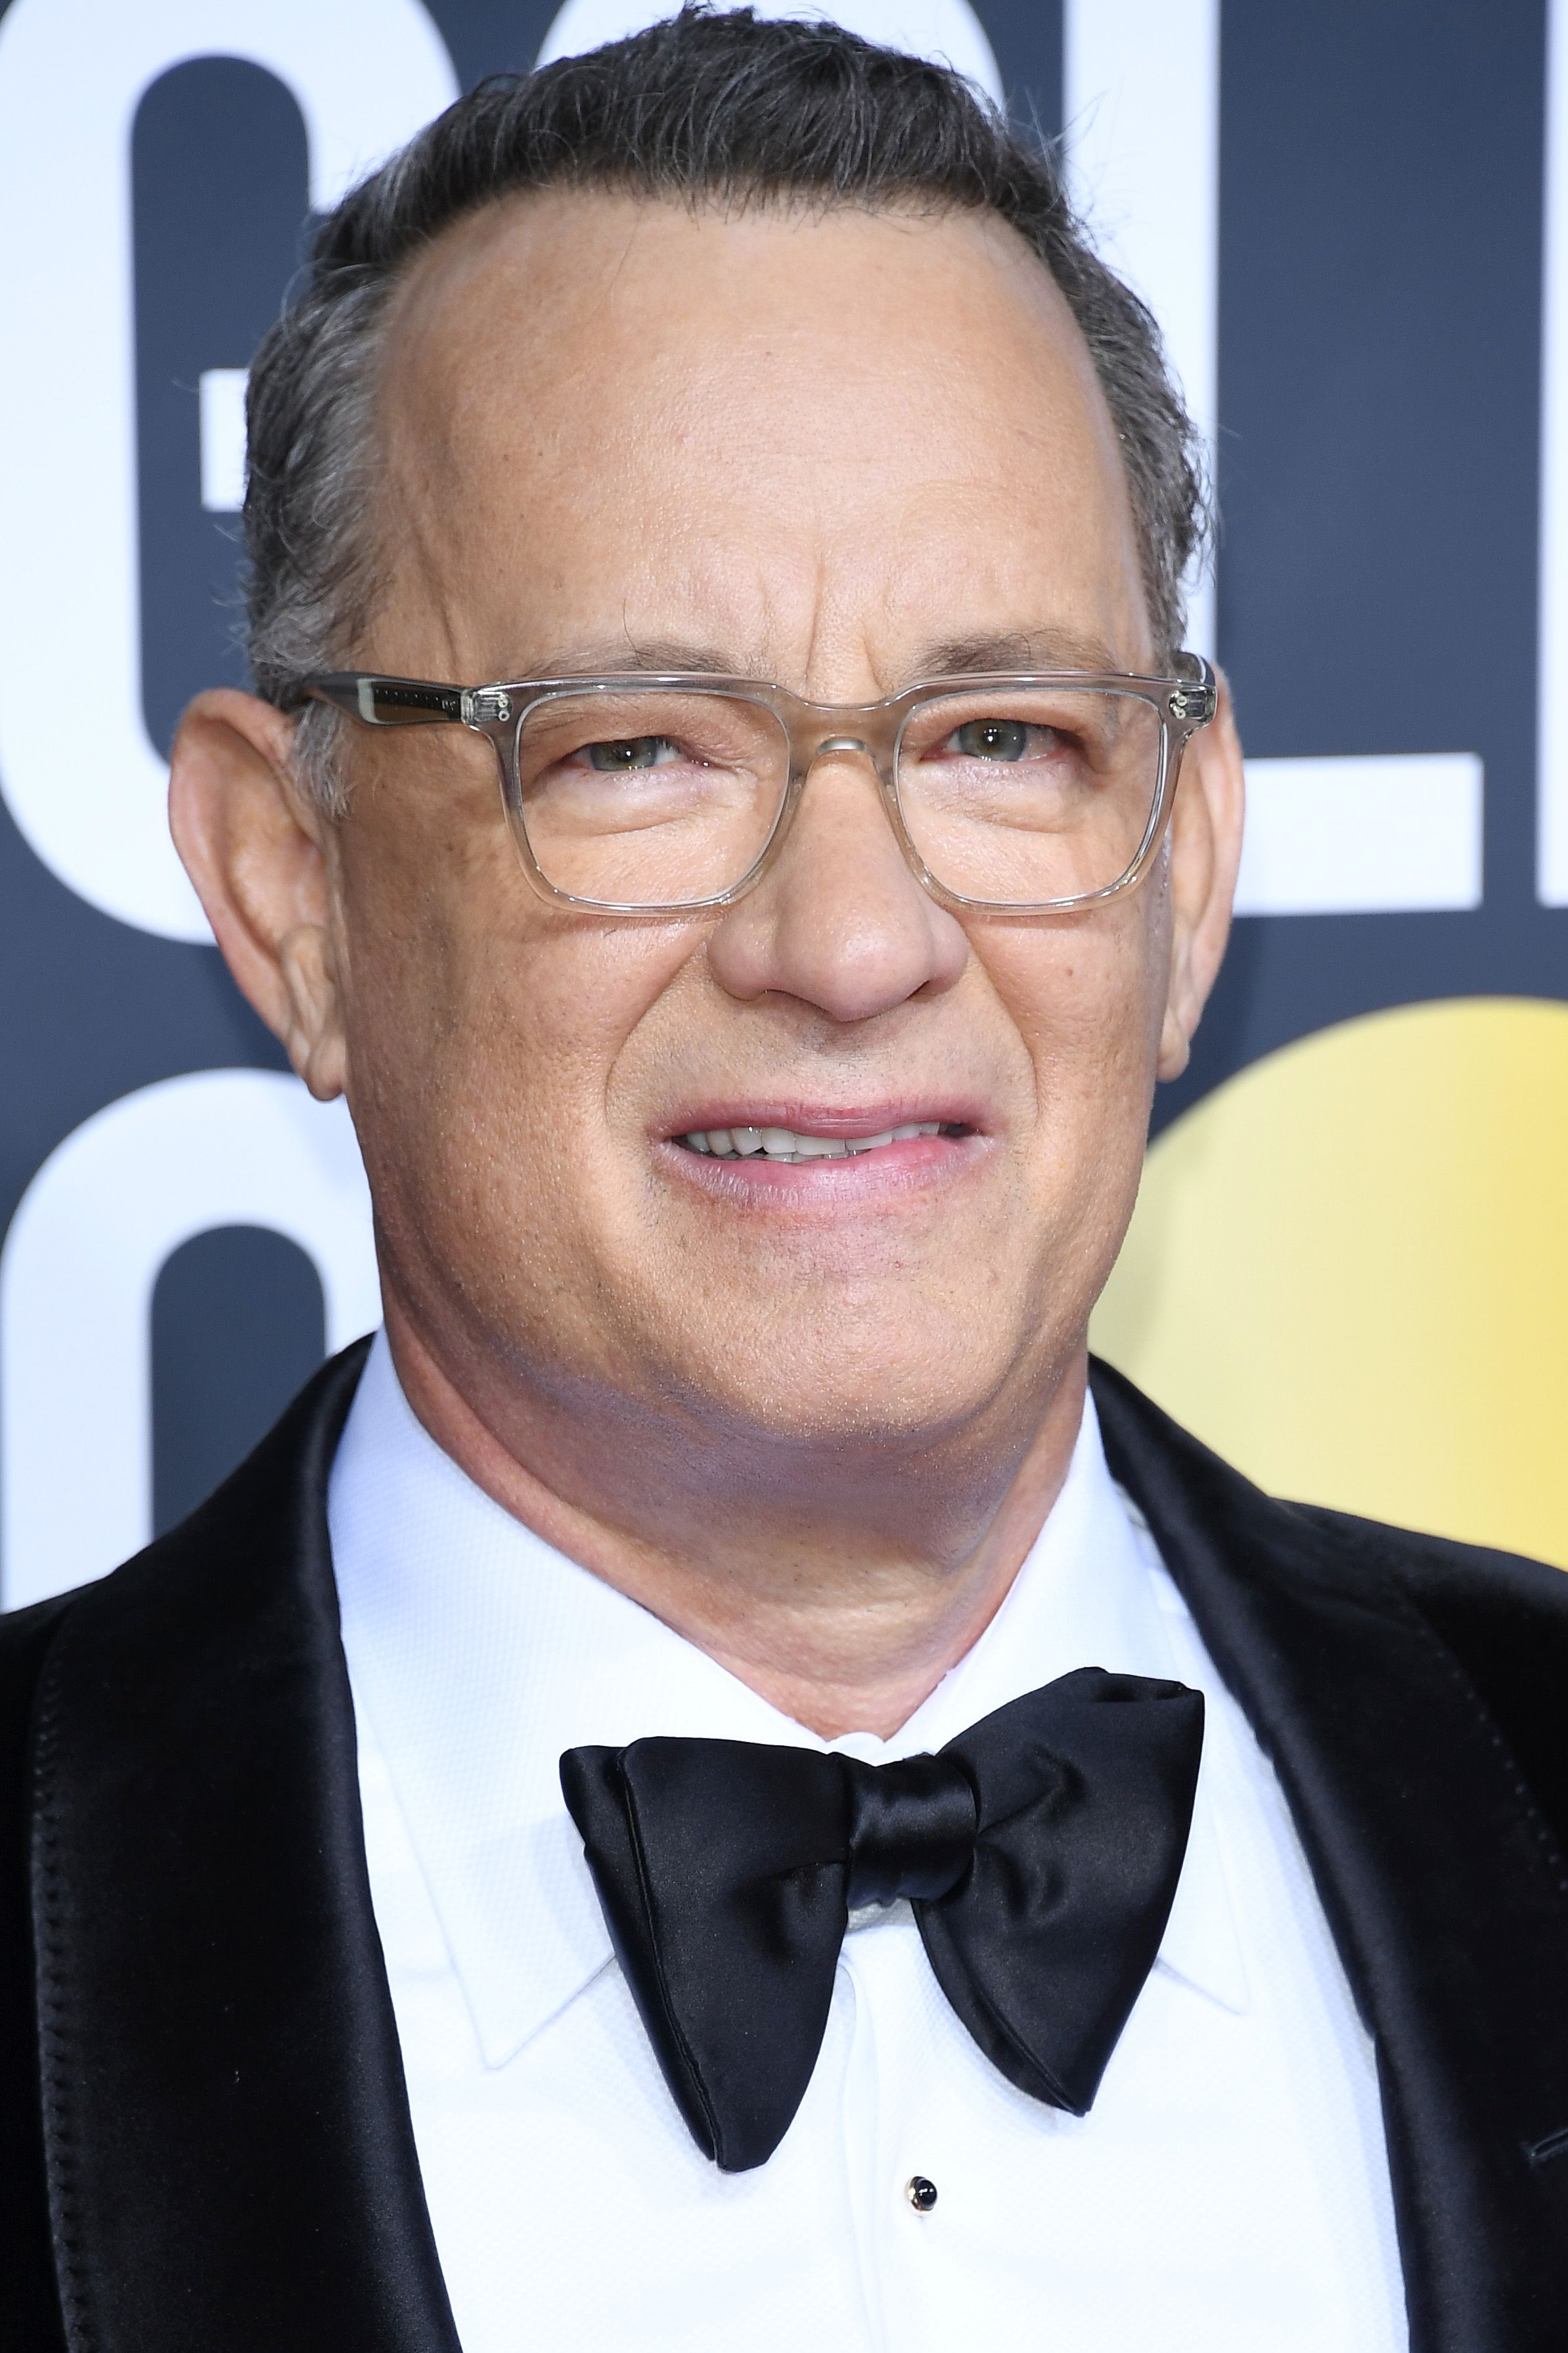 Tom Hanks at the 77th Annual Golden Globe Awards at The Beverly Hilton Hotel on January 05, 2020 in Beverly Hills, California | Photo: Getty Images